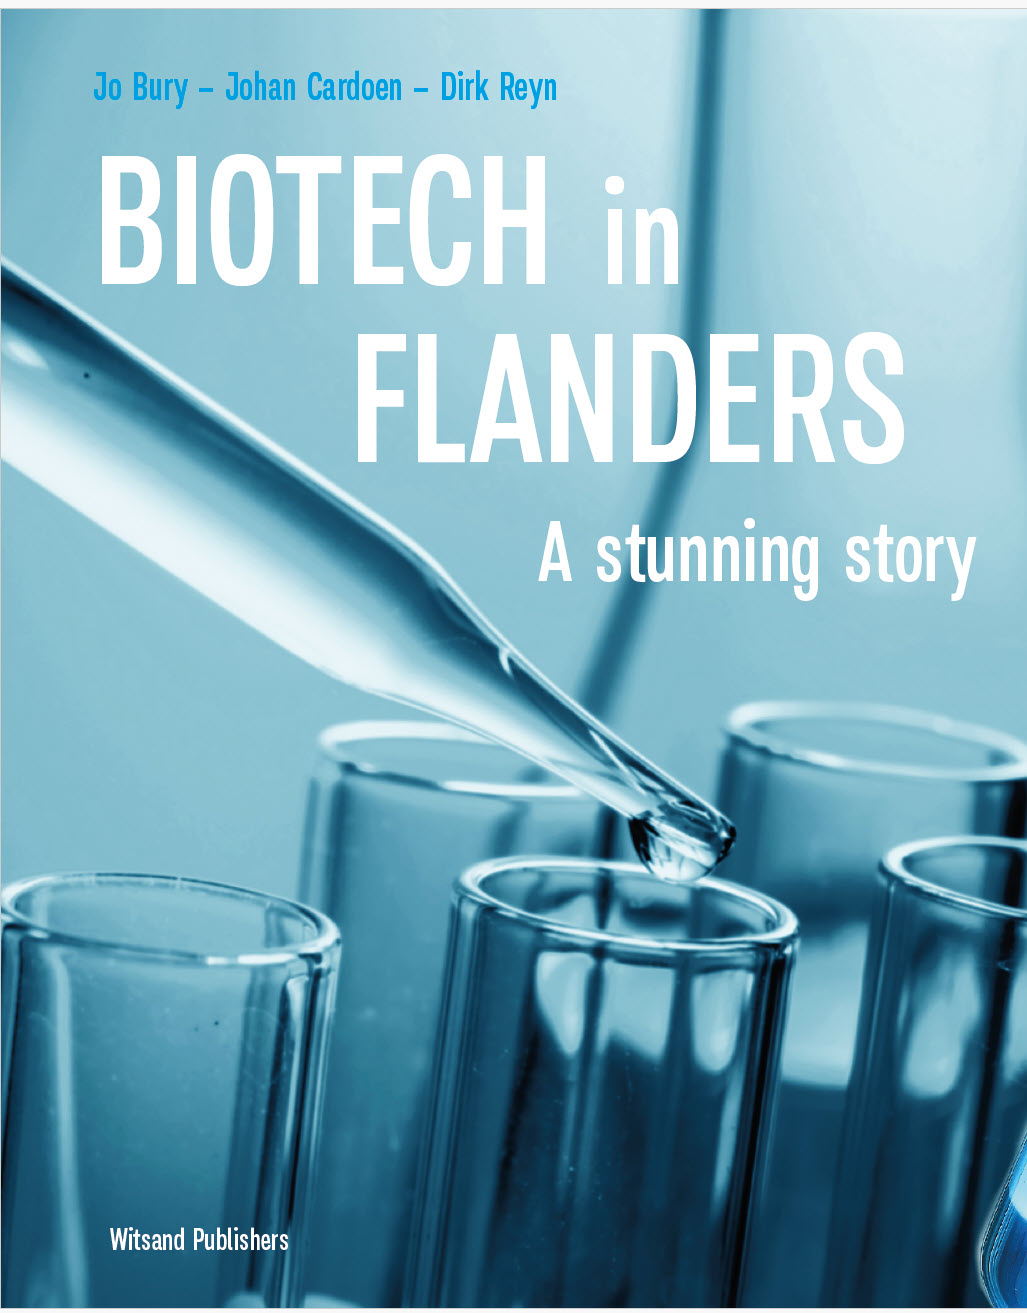 "Biotech in Flanders: A stunning story" now available for purchase